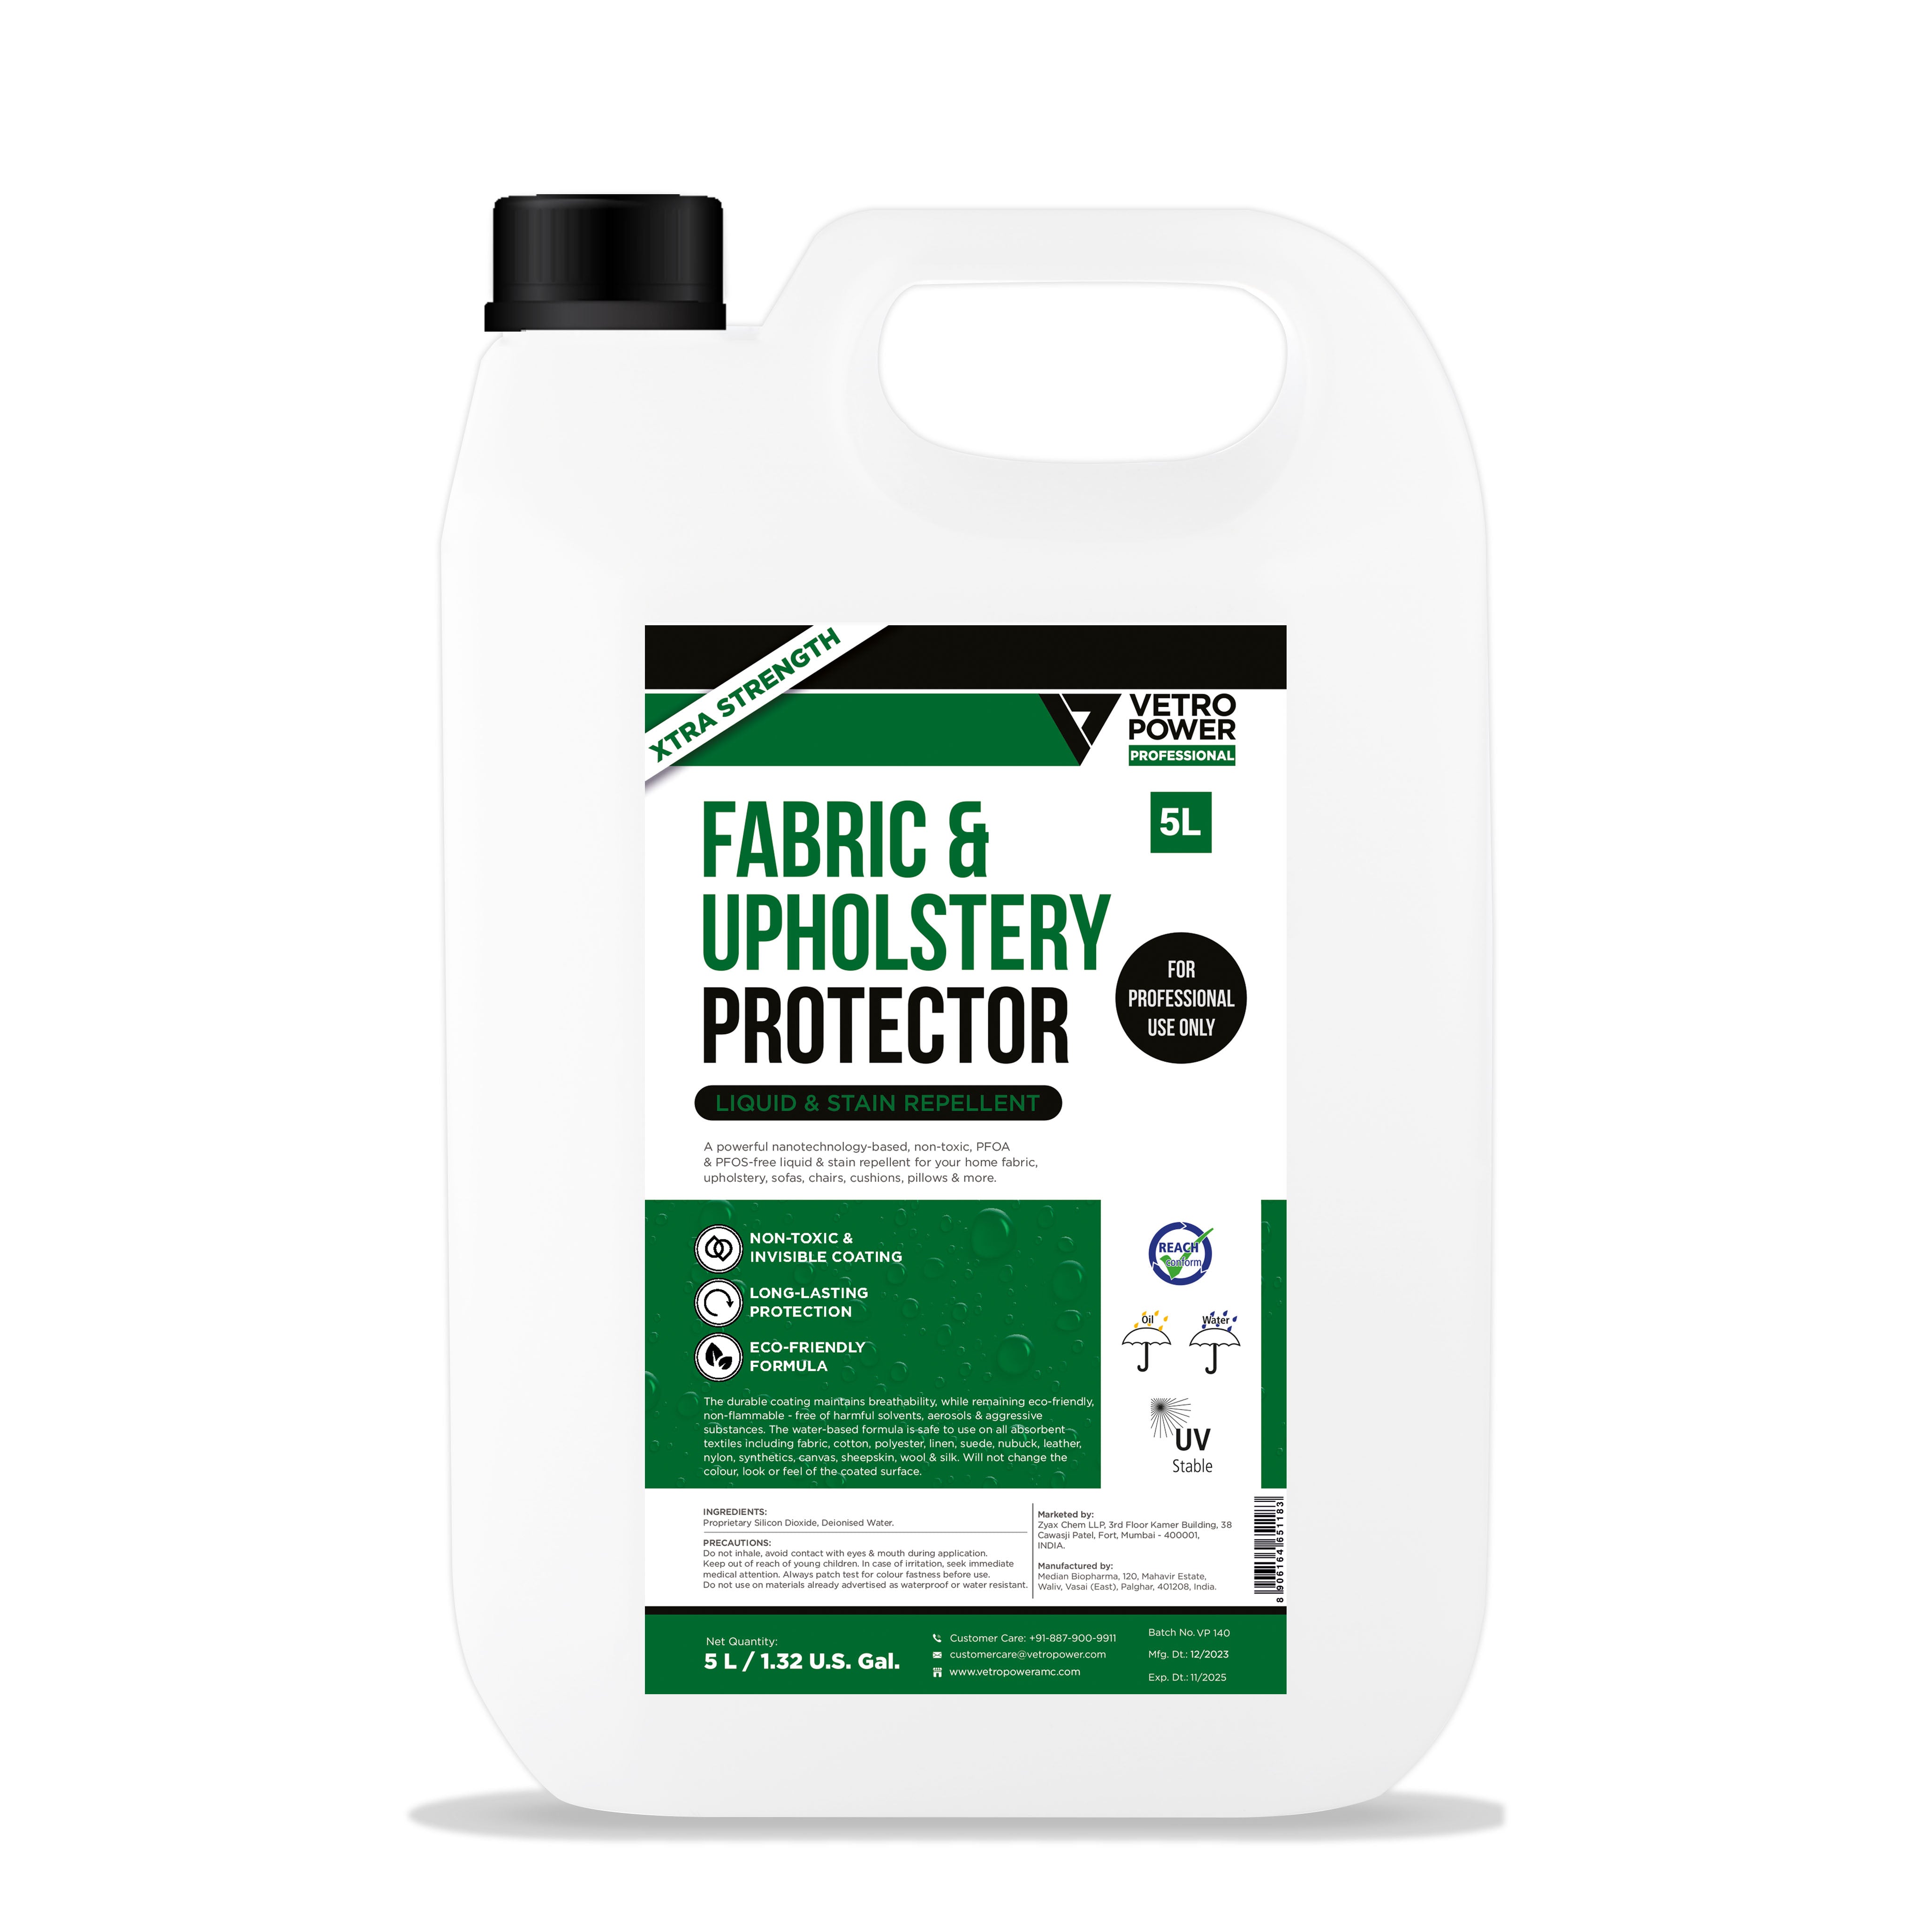 Vetro Power Professional Fabric & Upholstery Protector 5L